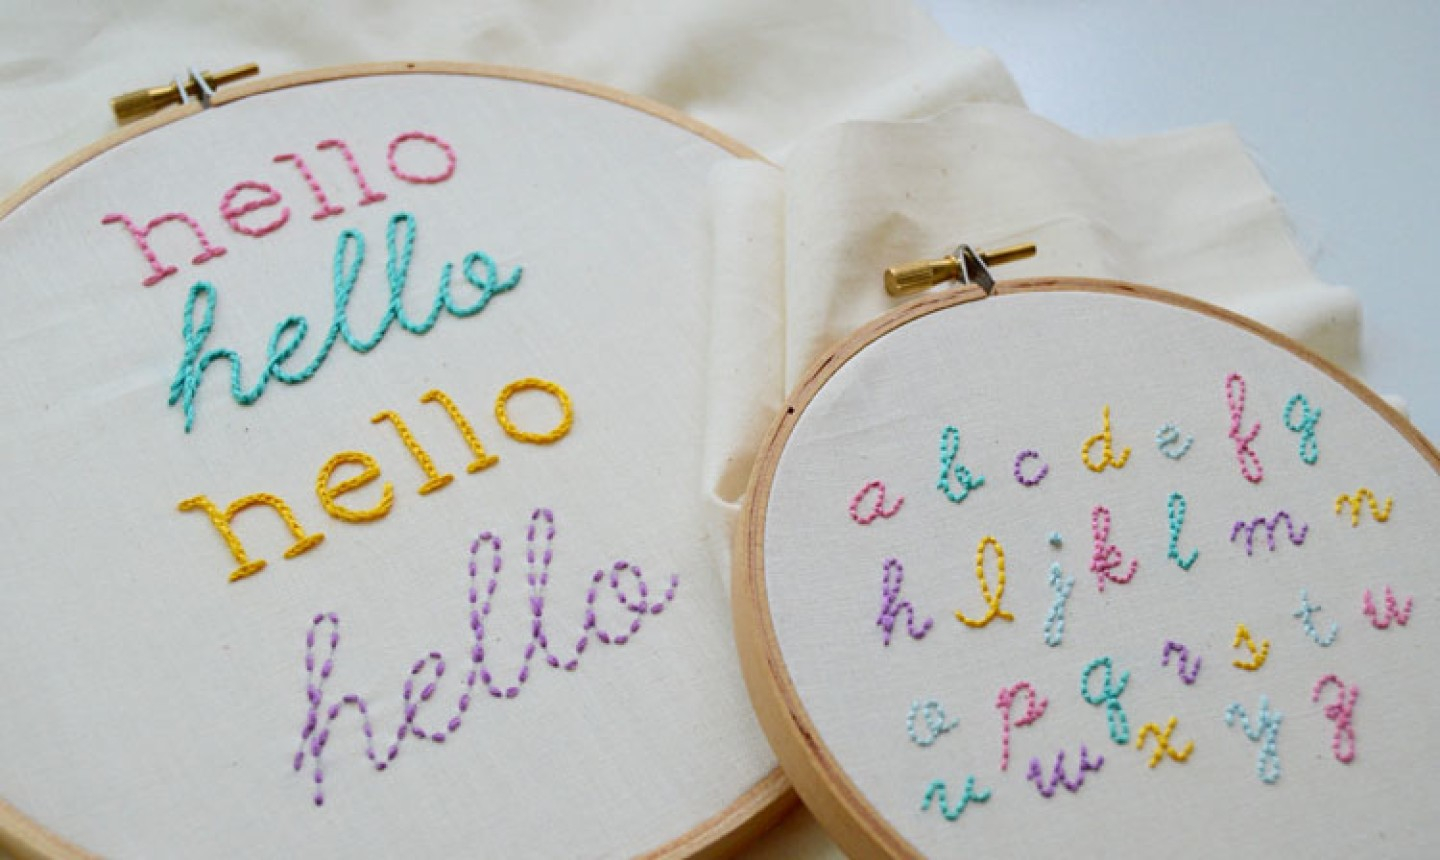 Free Embroidery Alphabet Patterns 4 Surprisingly Easy Stitches For Perfect Hand Embroidered Letters